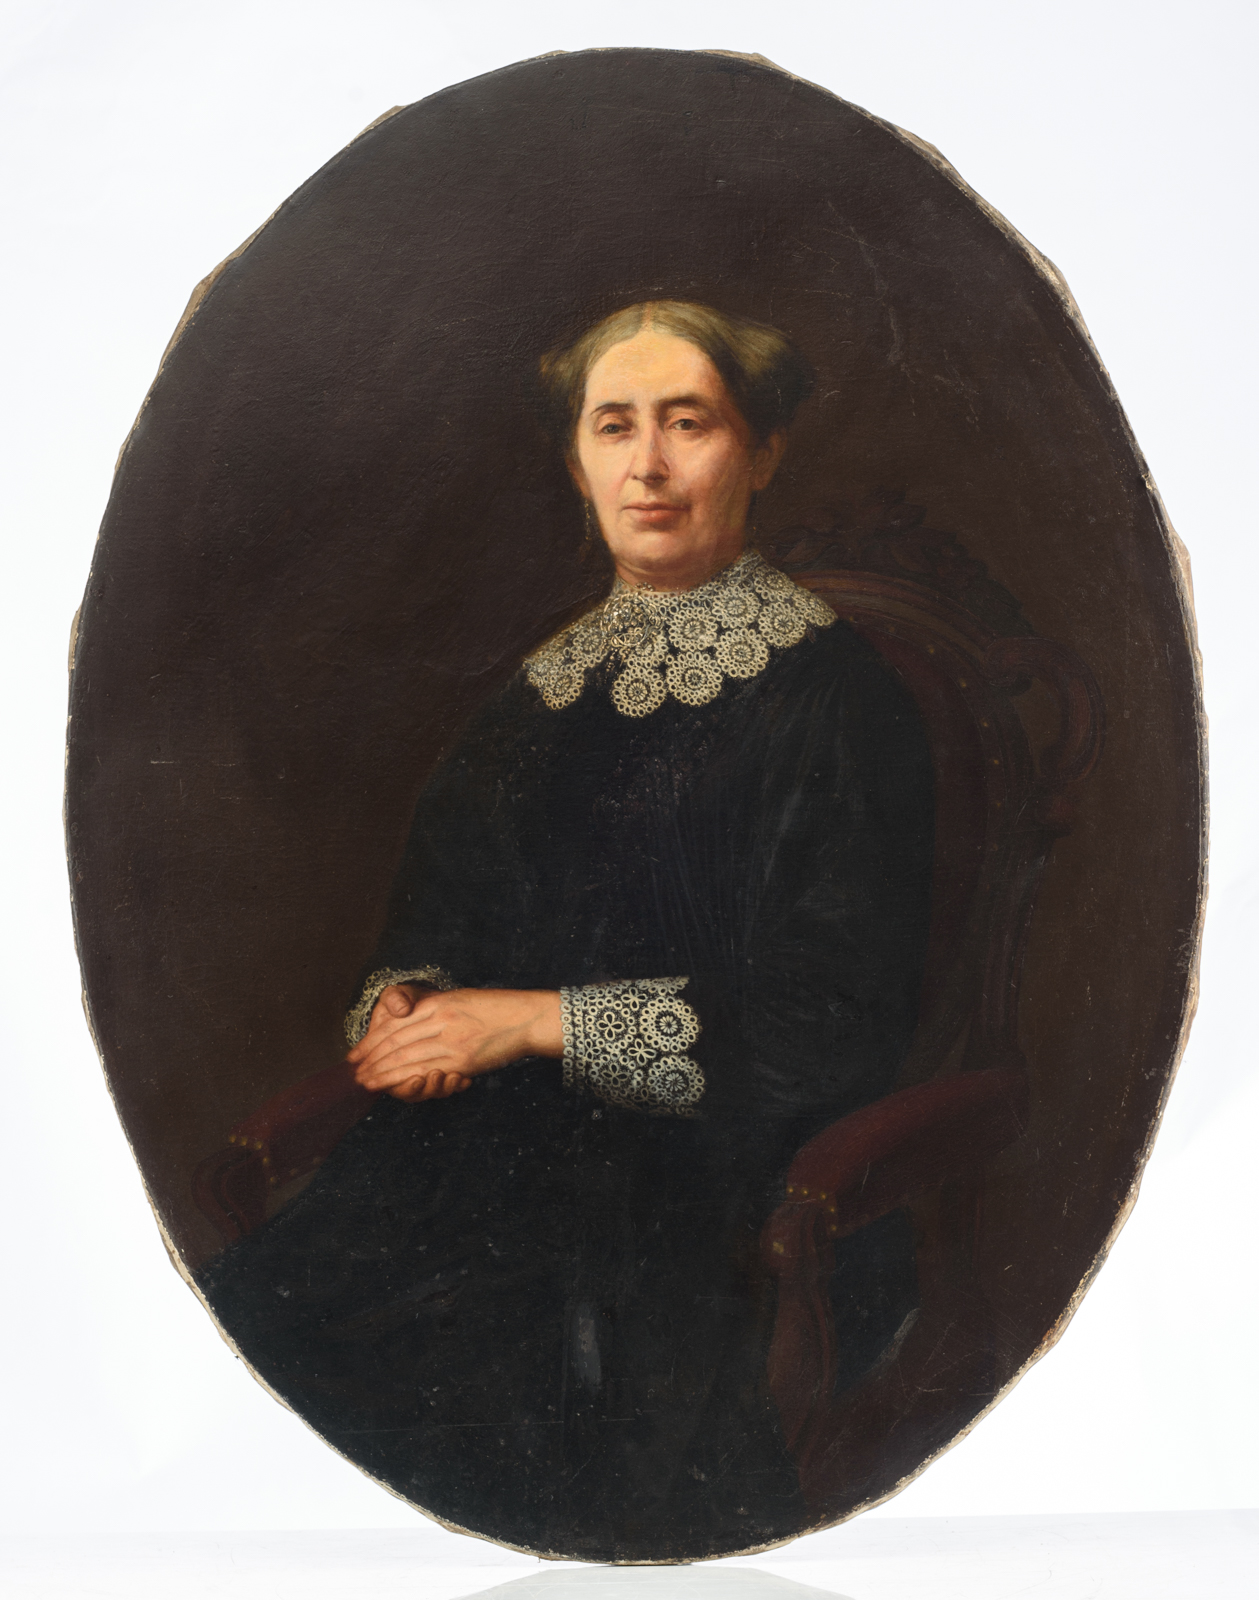 No visible signature, the portrait of a lady, 19thC, oil on canvas, 91 x 122 cm - Image 2 of 3